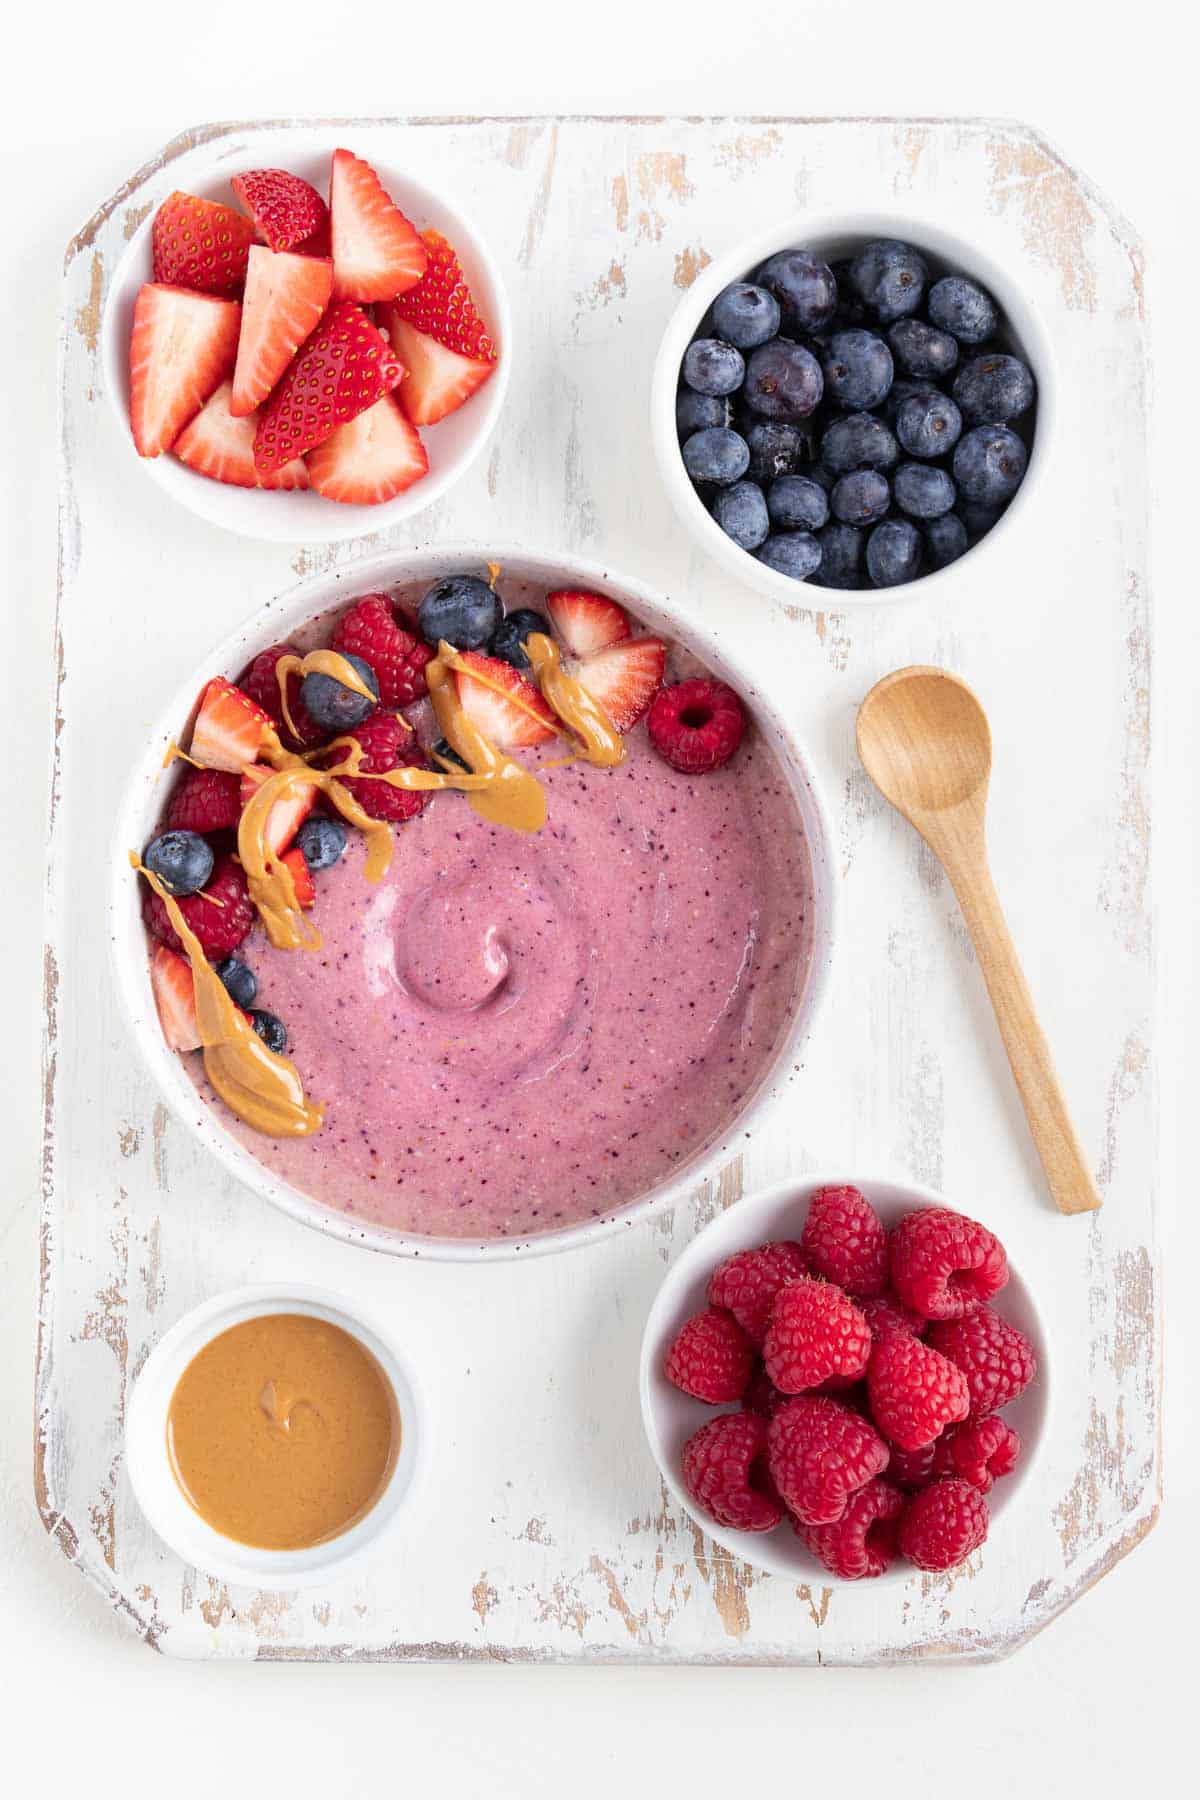 peanut butter and jelly smoothie bowl, a wooden spoon, and berries on top of a white distressed cutting board